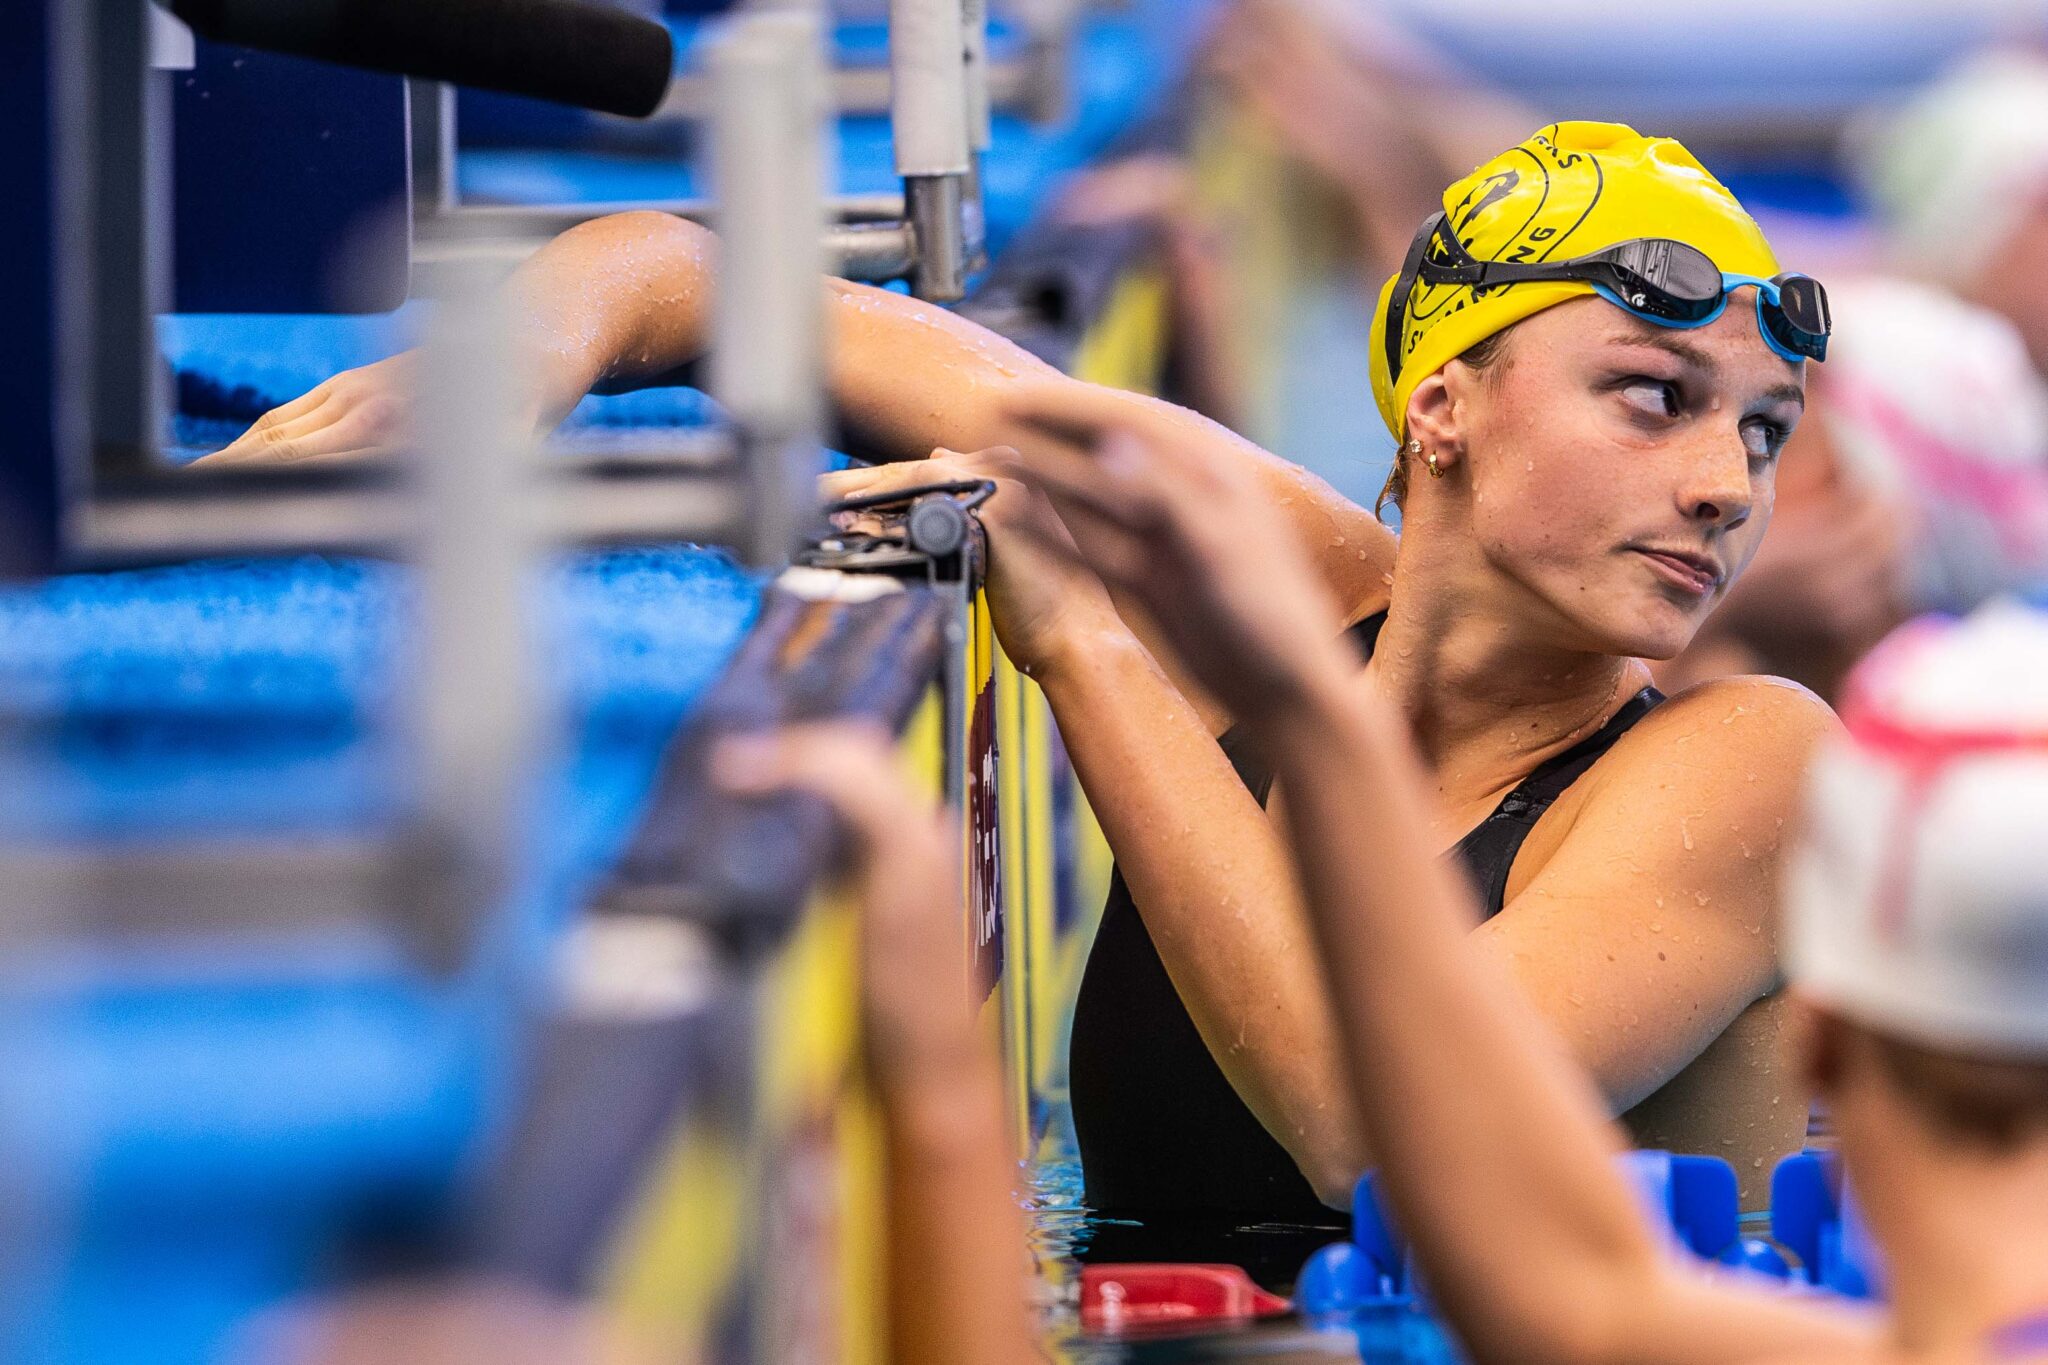 Summer McIntosh Sets New Pro Swim Series Record in 200 IM (2:07.16) With World’s Best Time